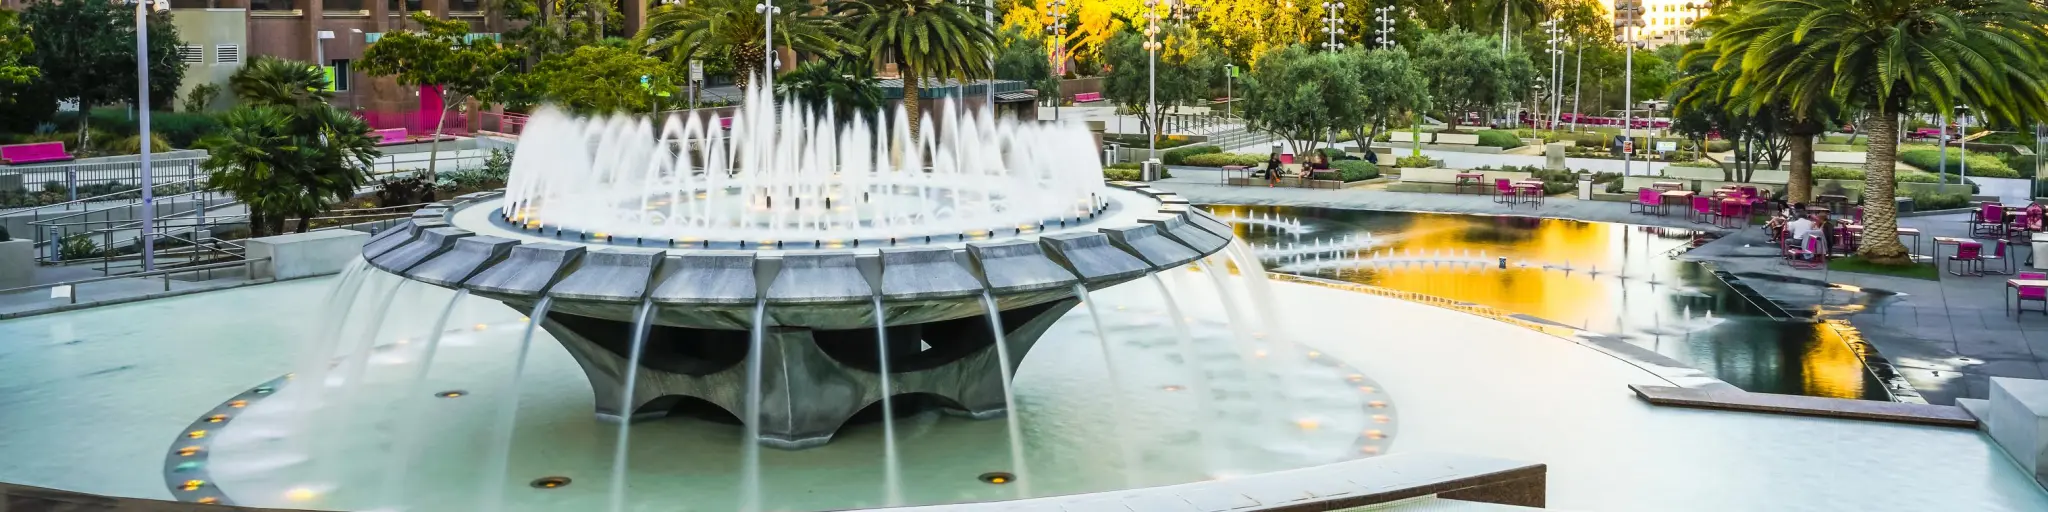 Fountain at sunset in Grand Park, LA